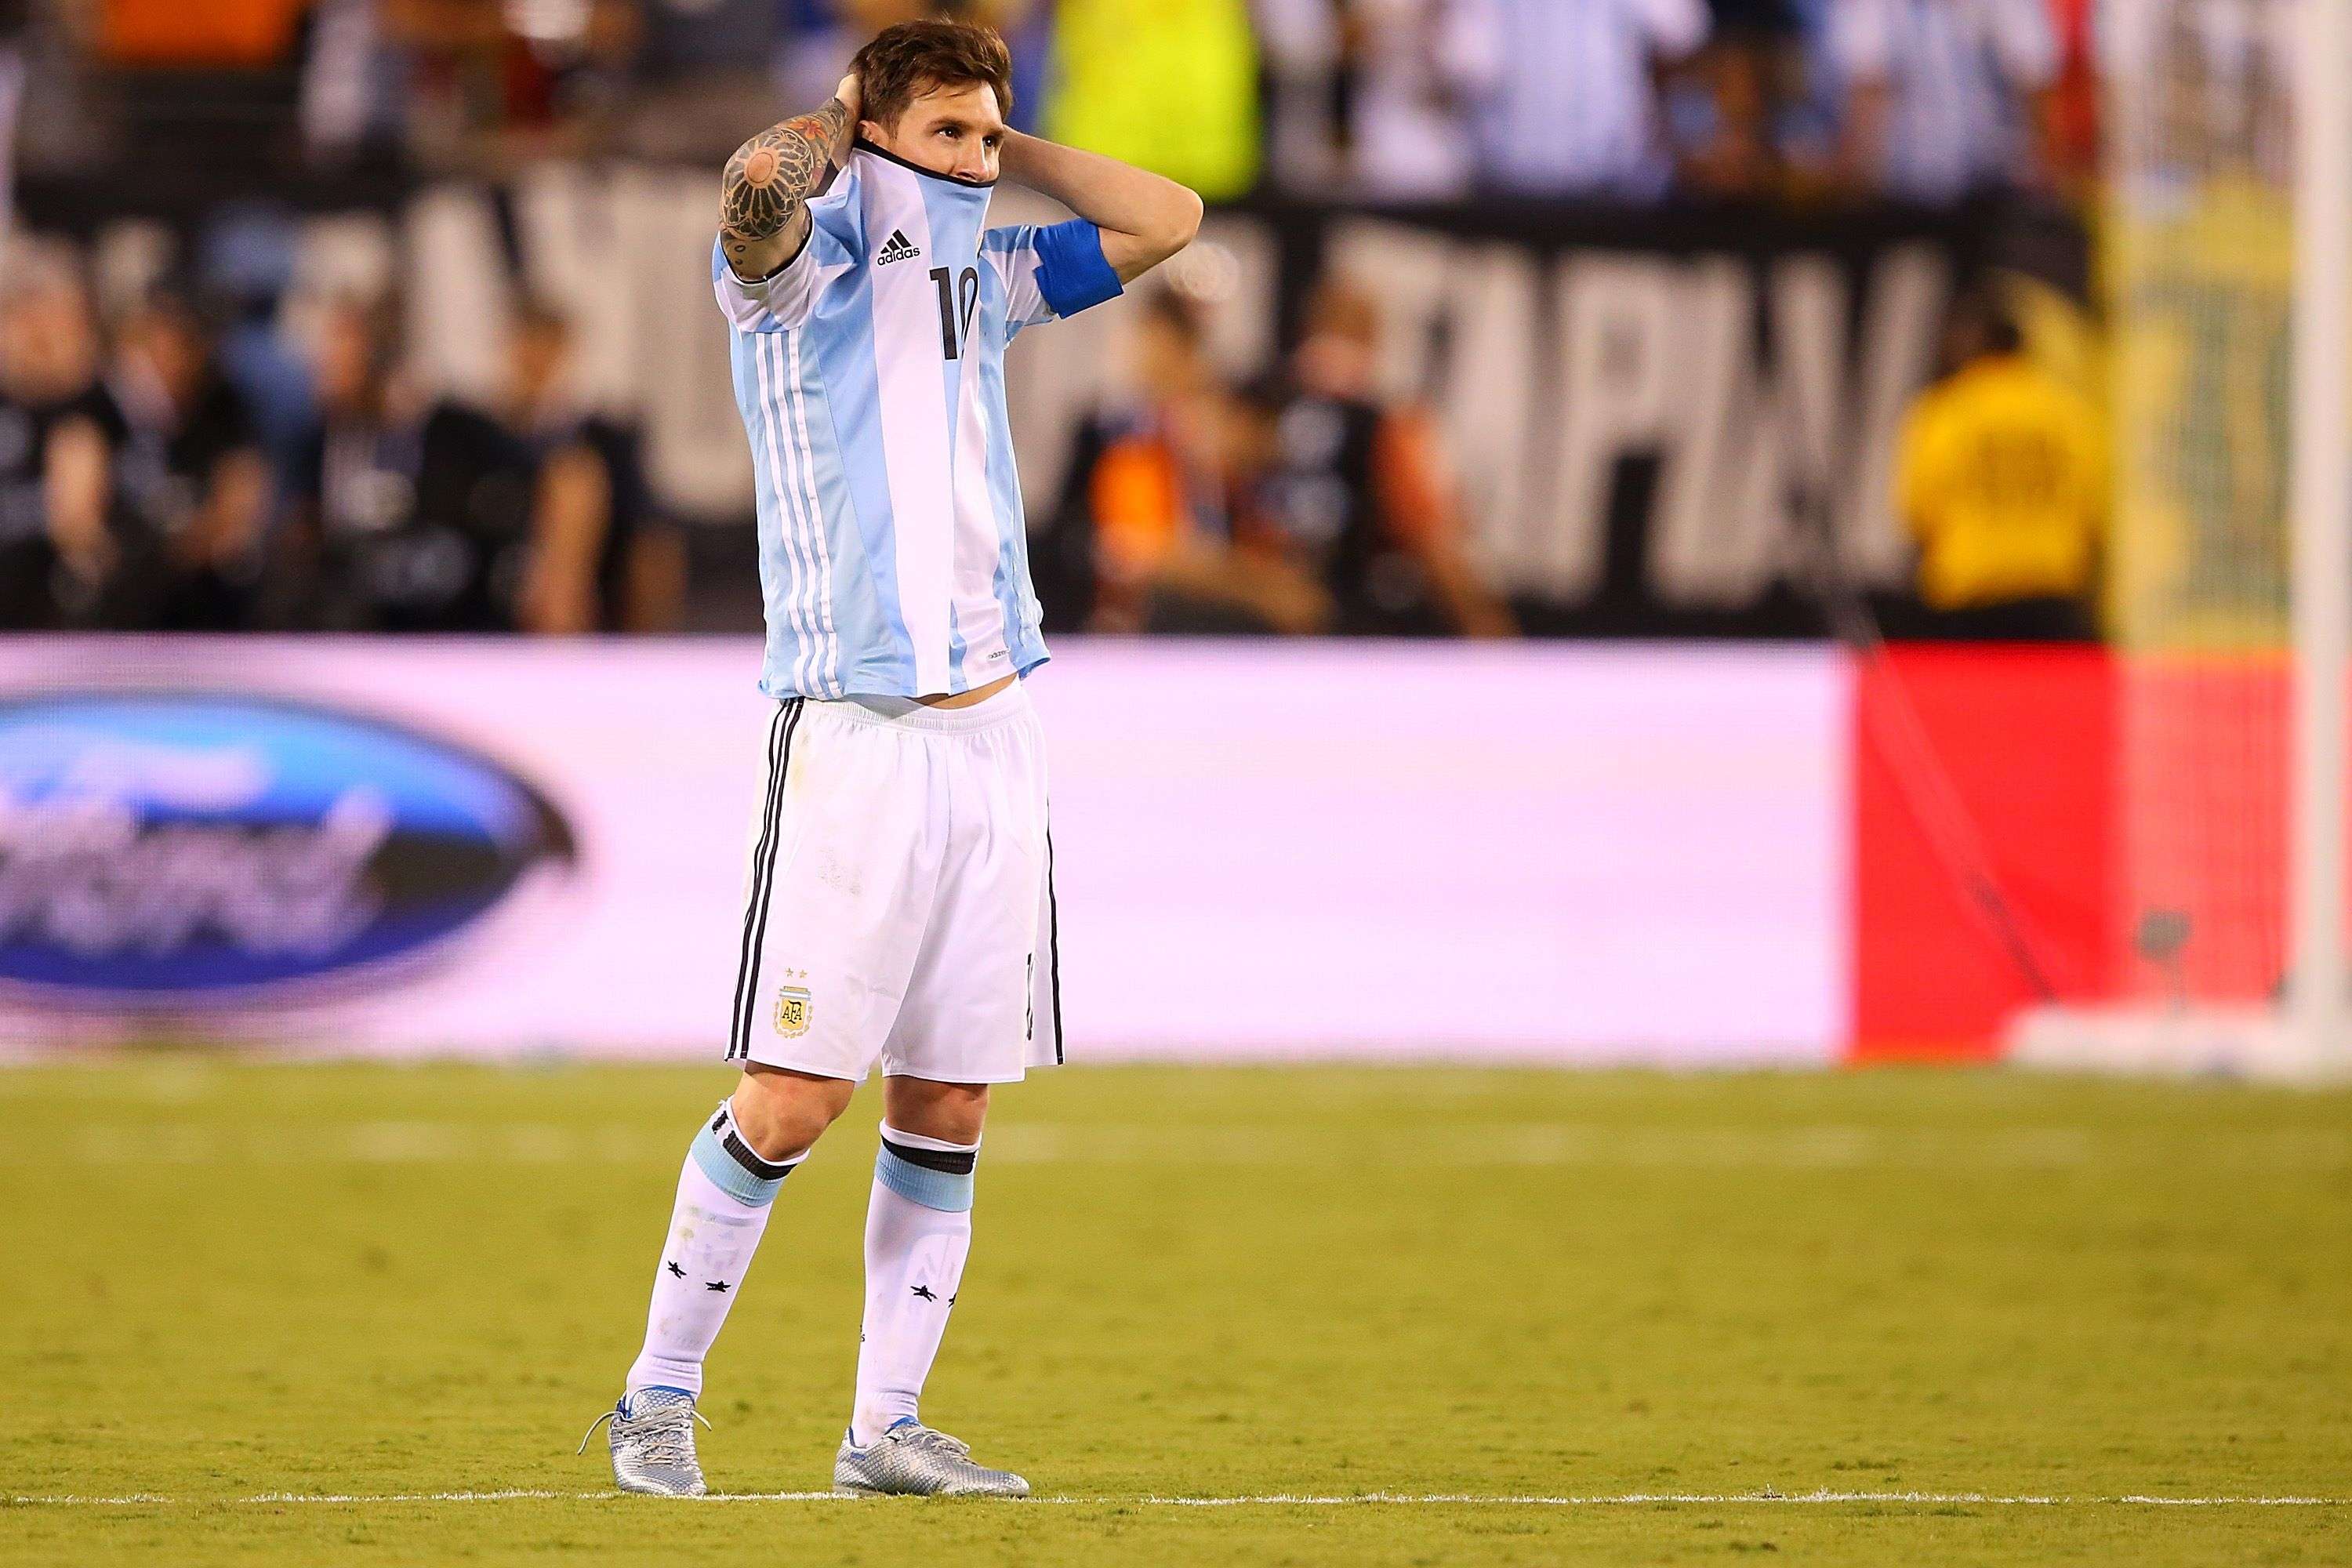 Argentina’s Lionel Messi missed a penalty in his team’s shoot-out defeat to Chile in the final of the Copa America. Photo: AFP